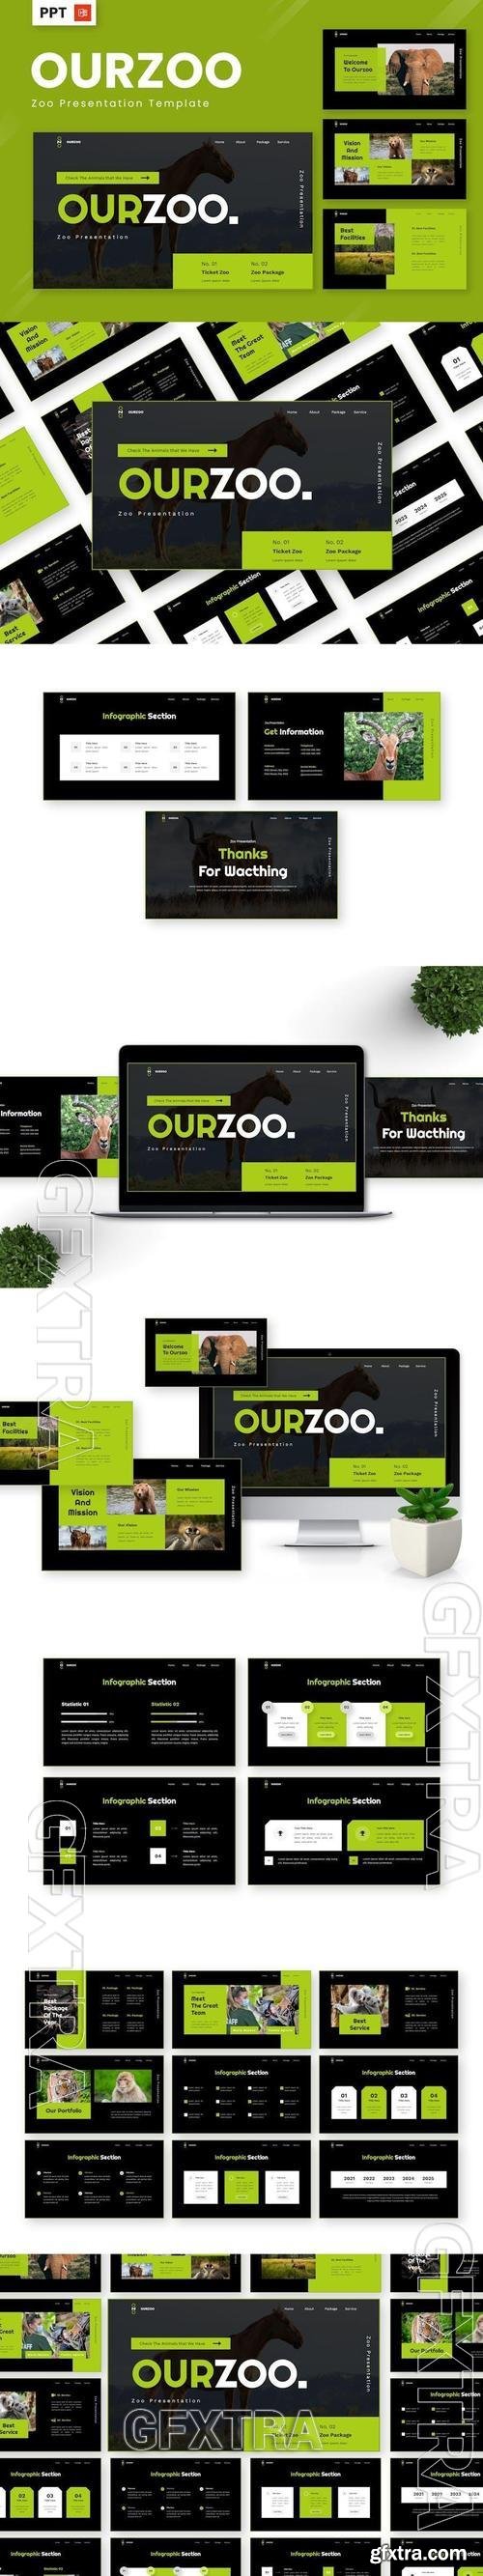 Ourzoo - Zoo Powerpoint Templates HLMP646